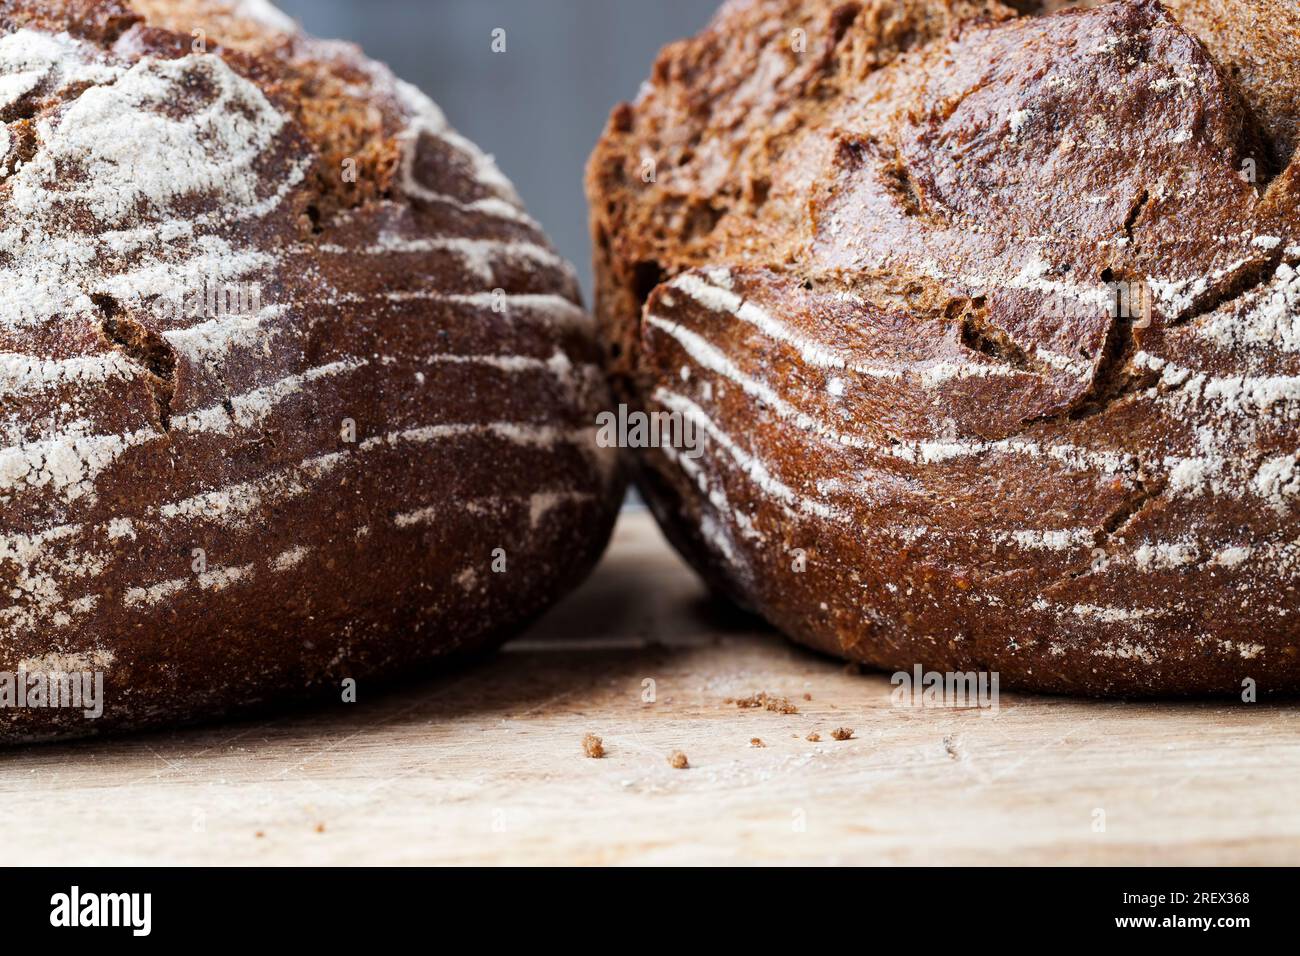 rye fresh loaf of bread, soft rye bread with a crisp crust, fresh and delicious rye bread made from rye flour Stock Photo